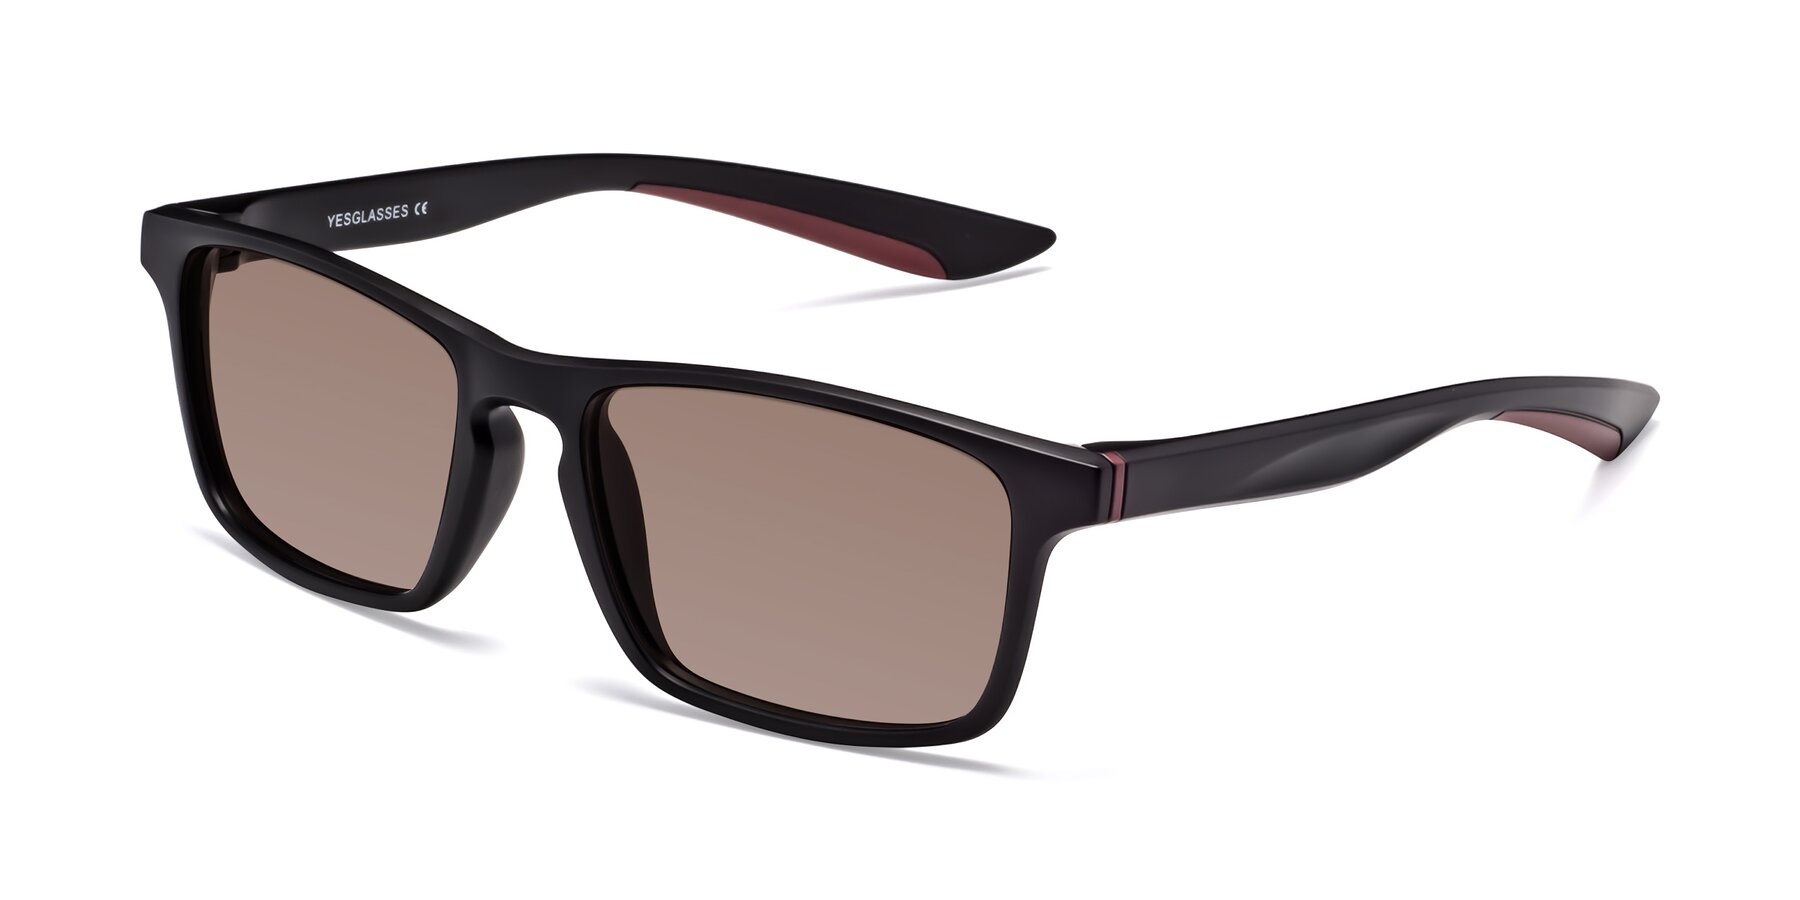 Angle of Passion in Matte Black-Wine with Medium Brown Tinted Lenses